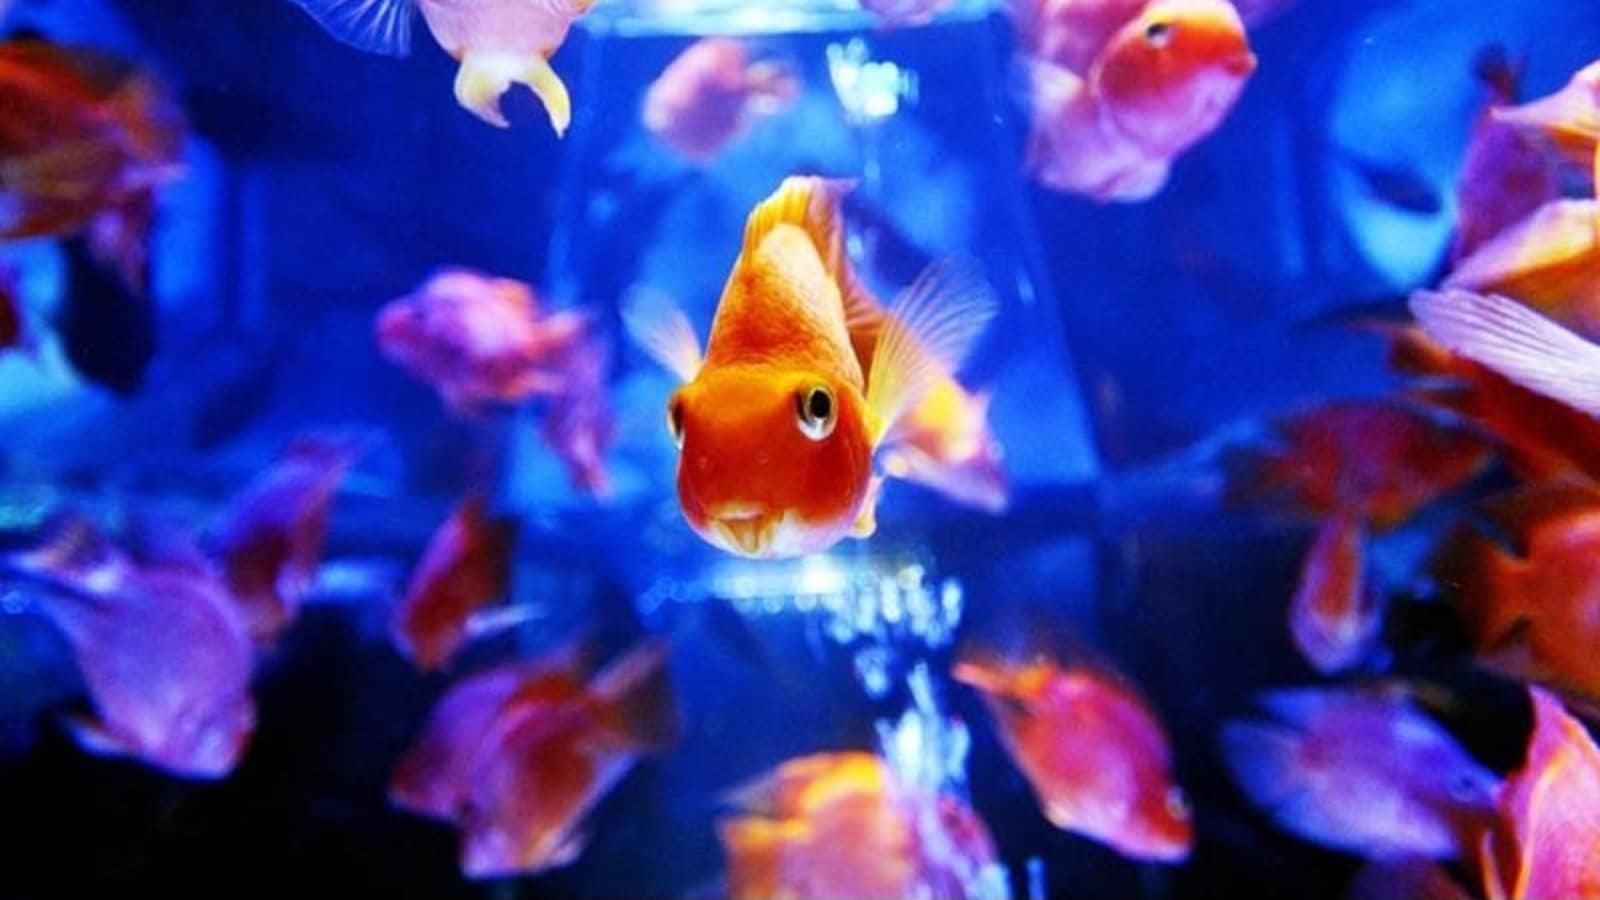 Vastu Tips: Things to keep in mind while keeping an aquarium in your home